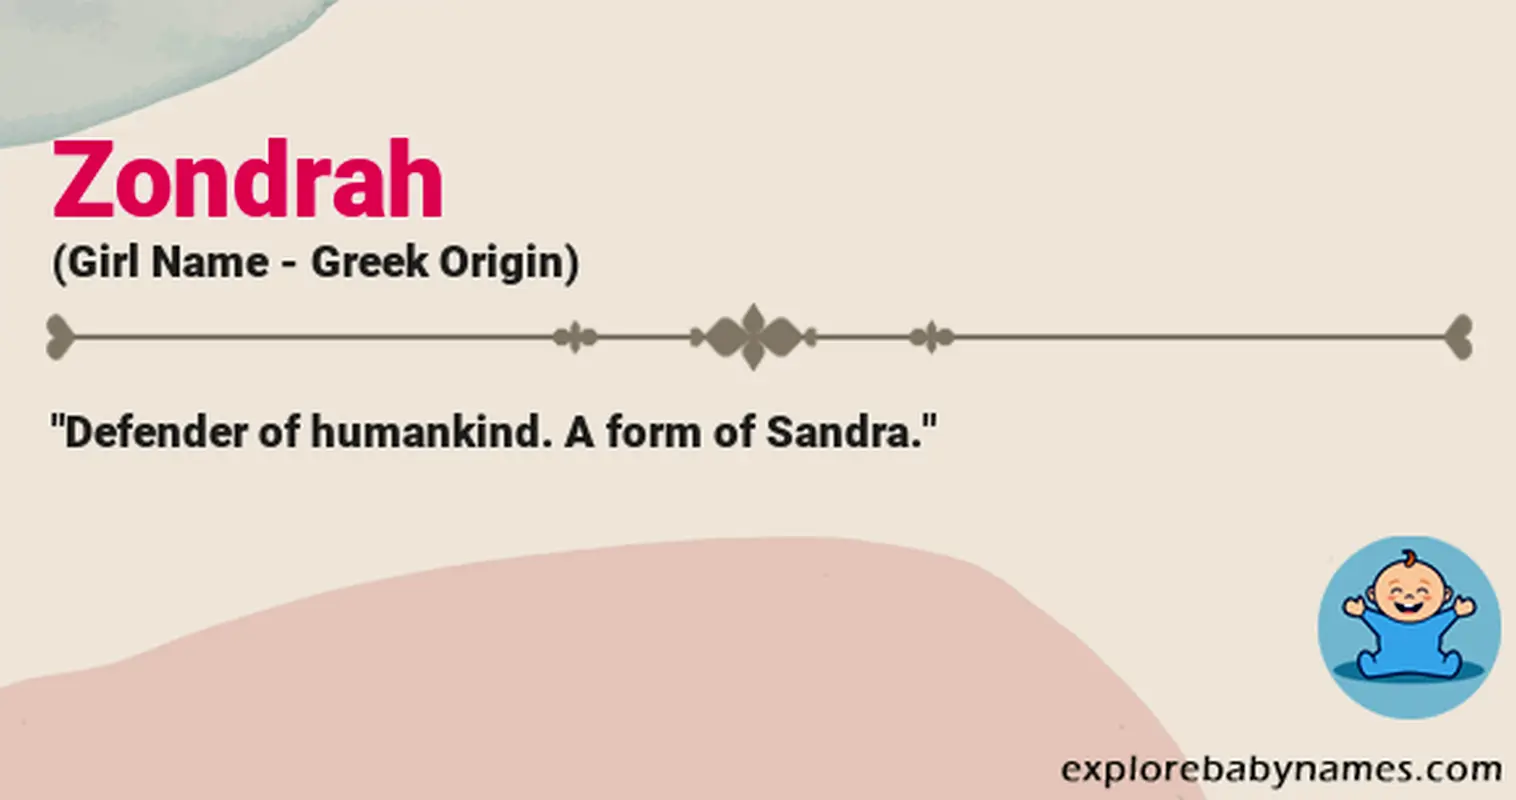 Meaning of Zondrah